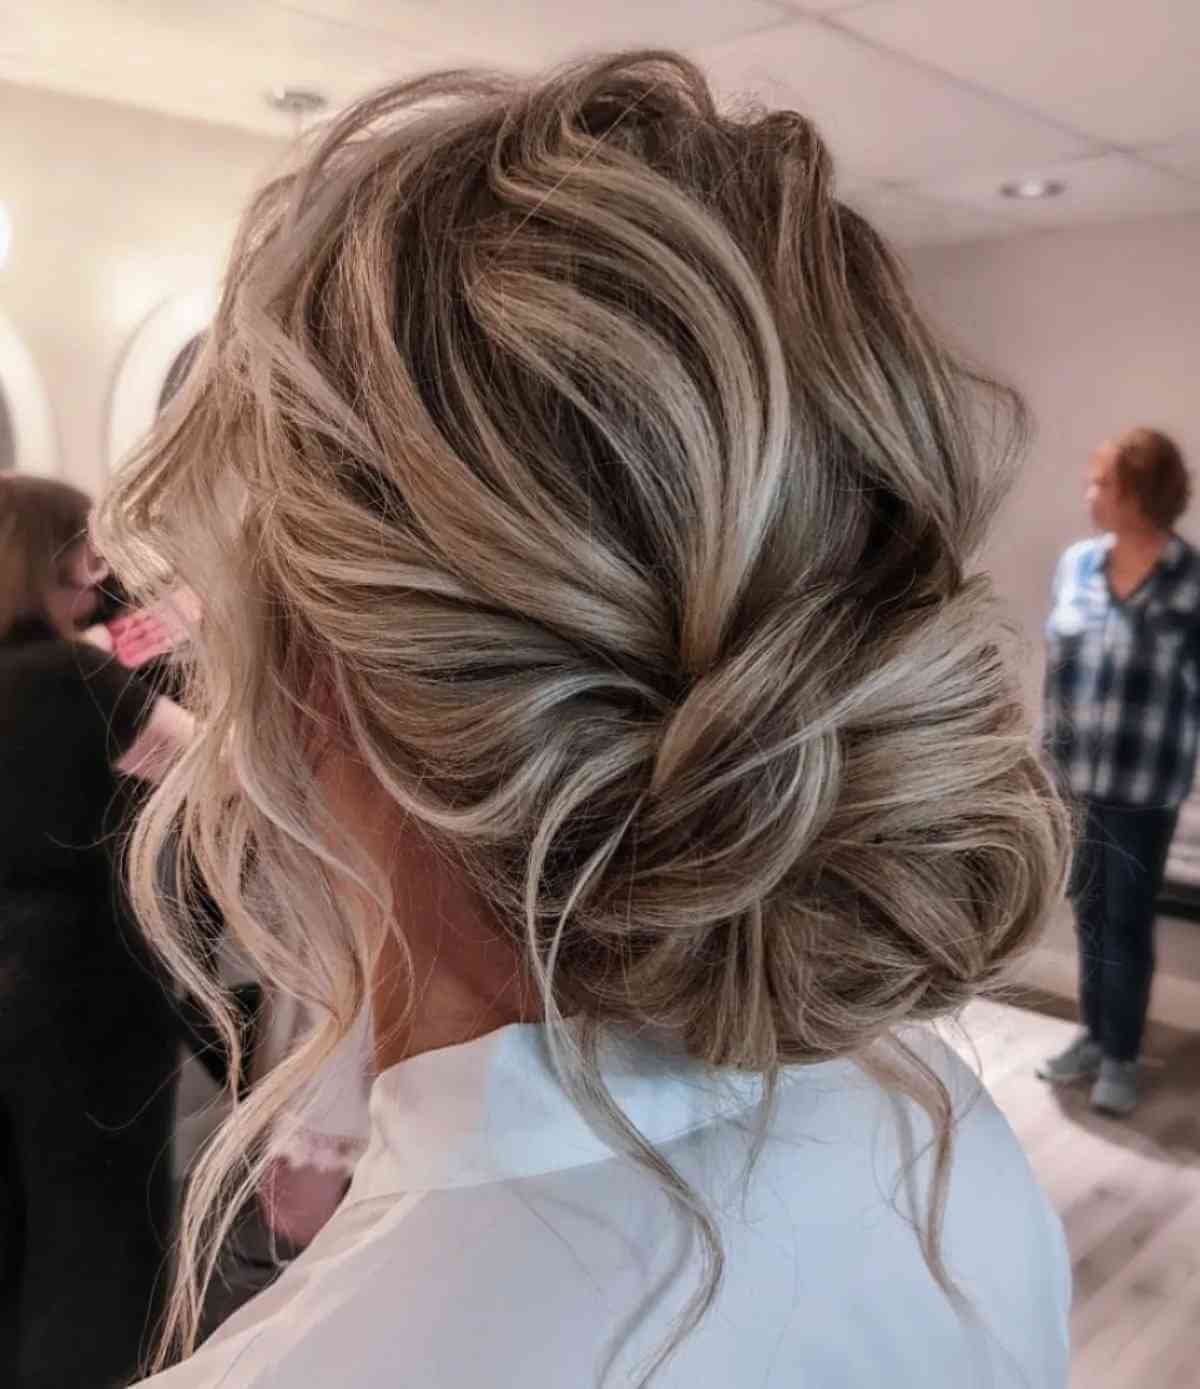 Messy Braided Double Bun: Five Minute Hairstyle - Girl Loves Glam